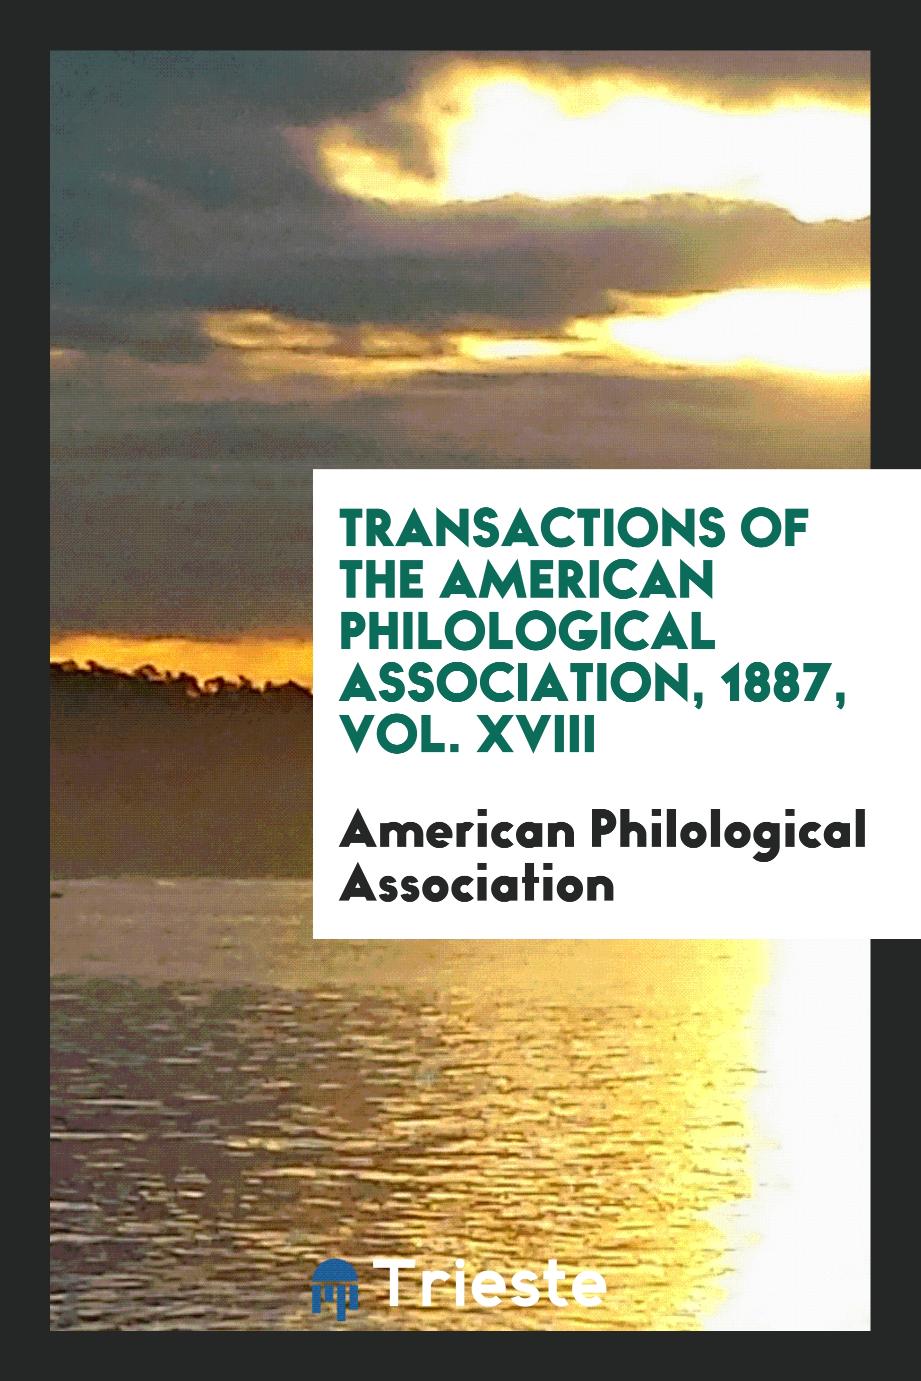 Transactions of the American Philological Association, 1887, Vol. XVIII